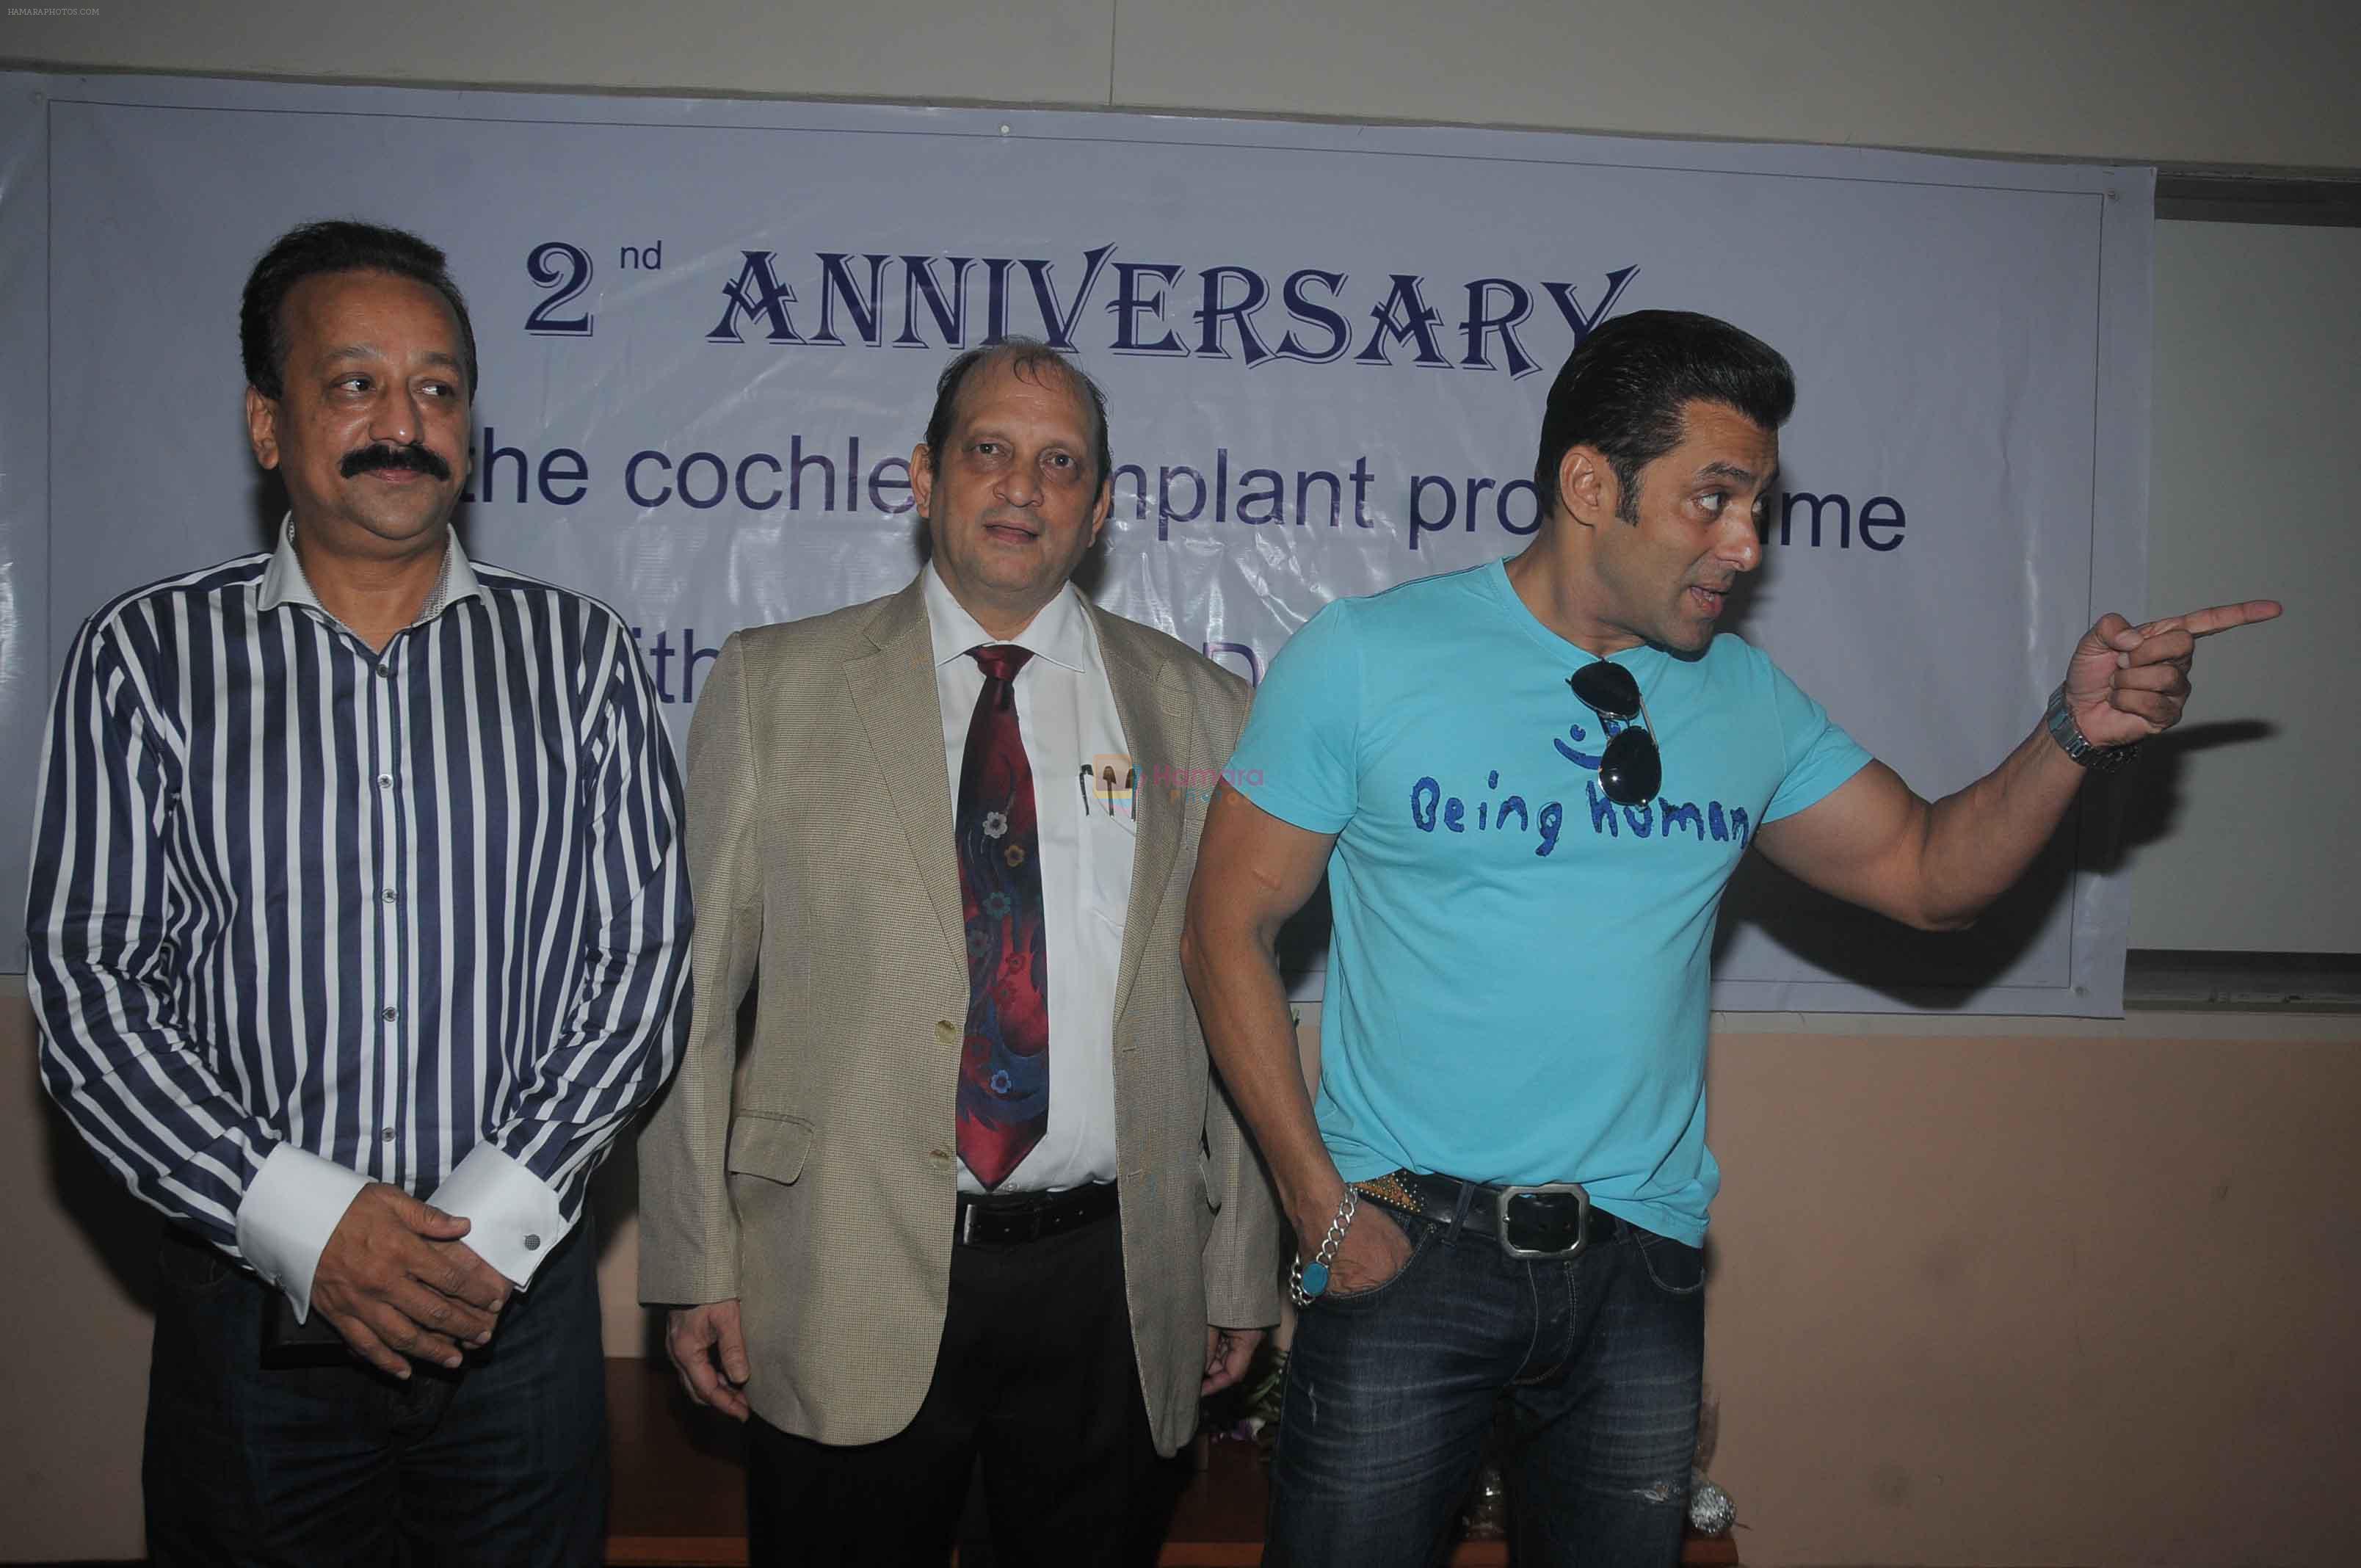 Salman Khan meets special kids at holy family hospital in Mumbai on 11th Oct 2013